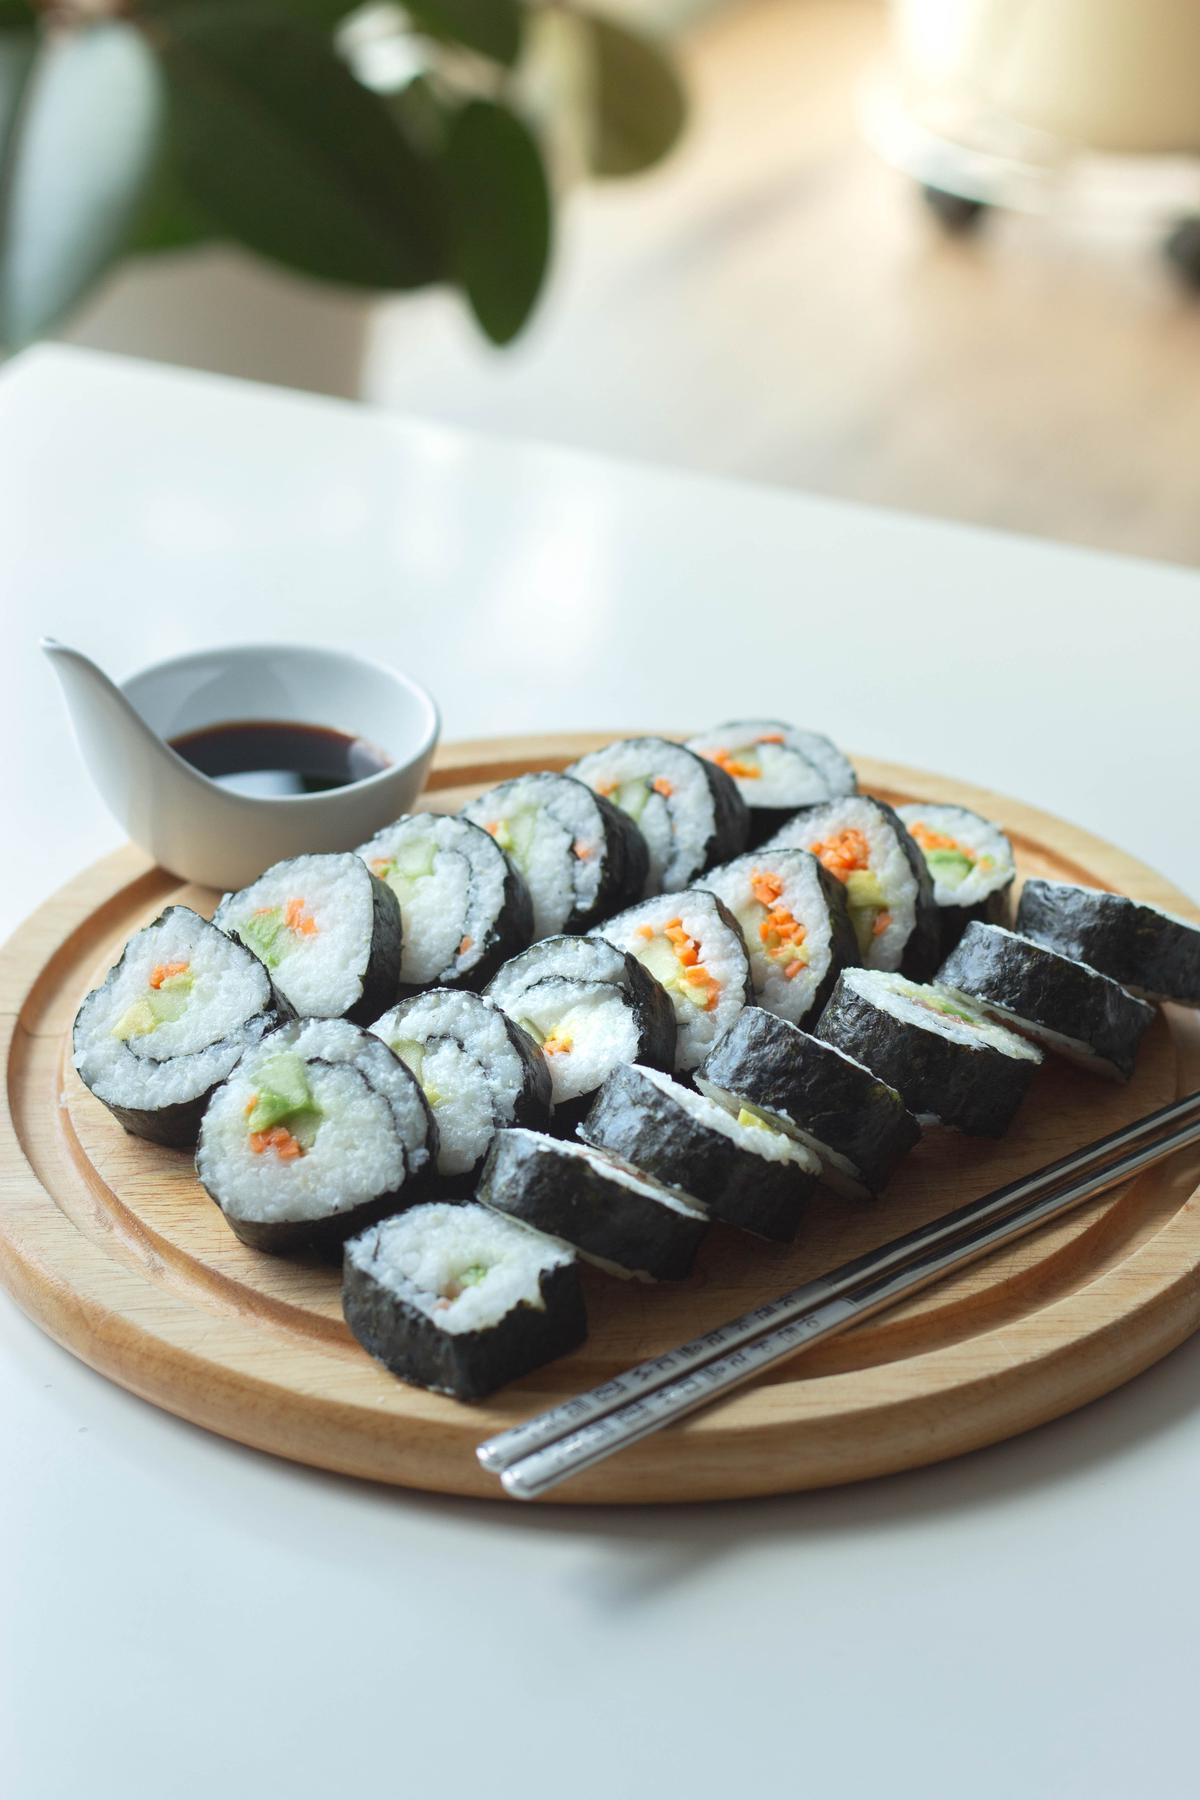 Image description: A plate of sushi rolls representing different interpretations of sushi from around the world